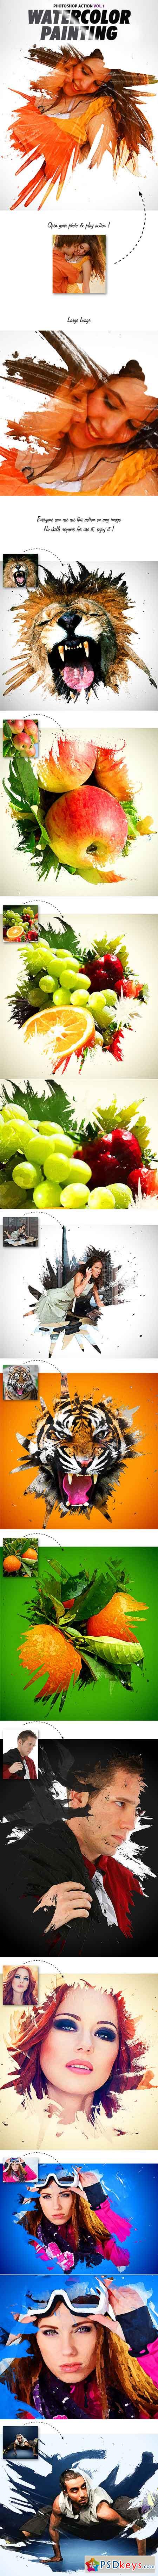 Watercolor Painting Vol.1 - Photoshop Action 11526676